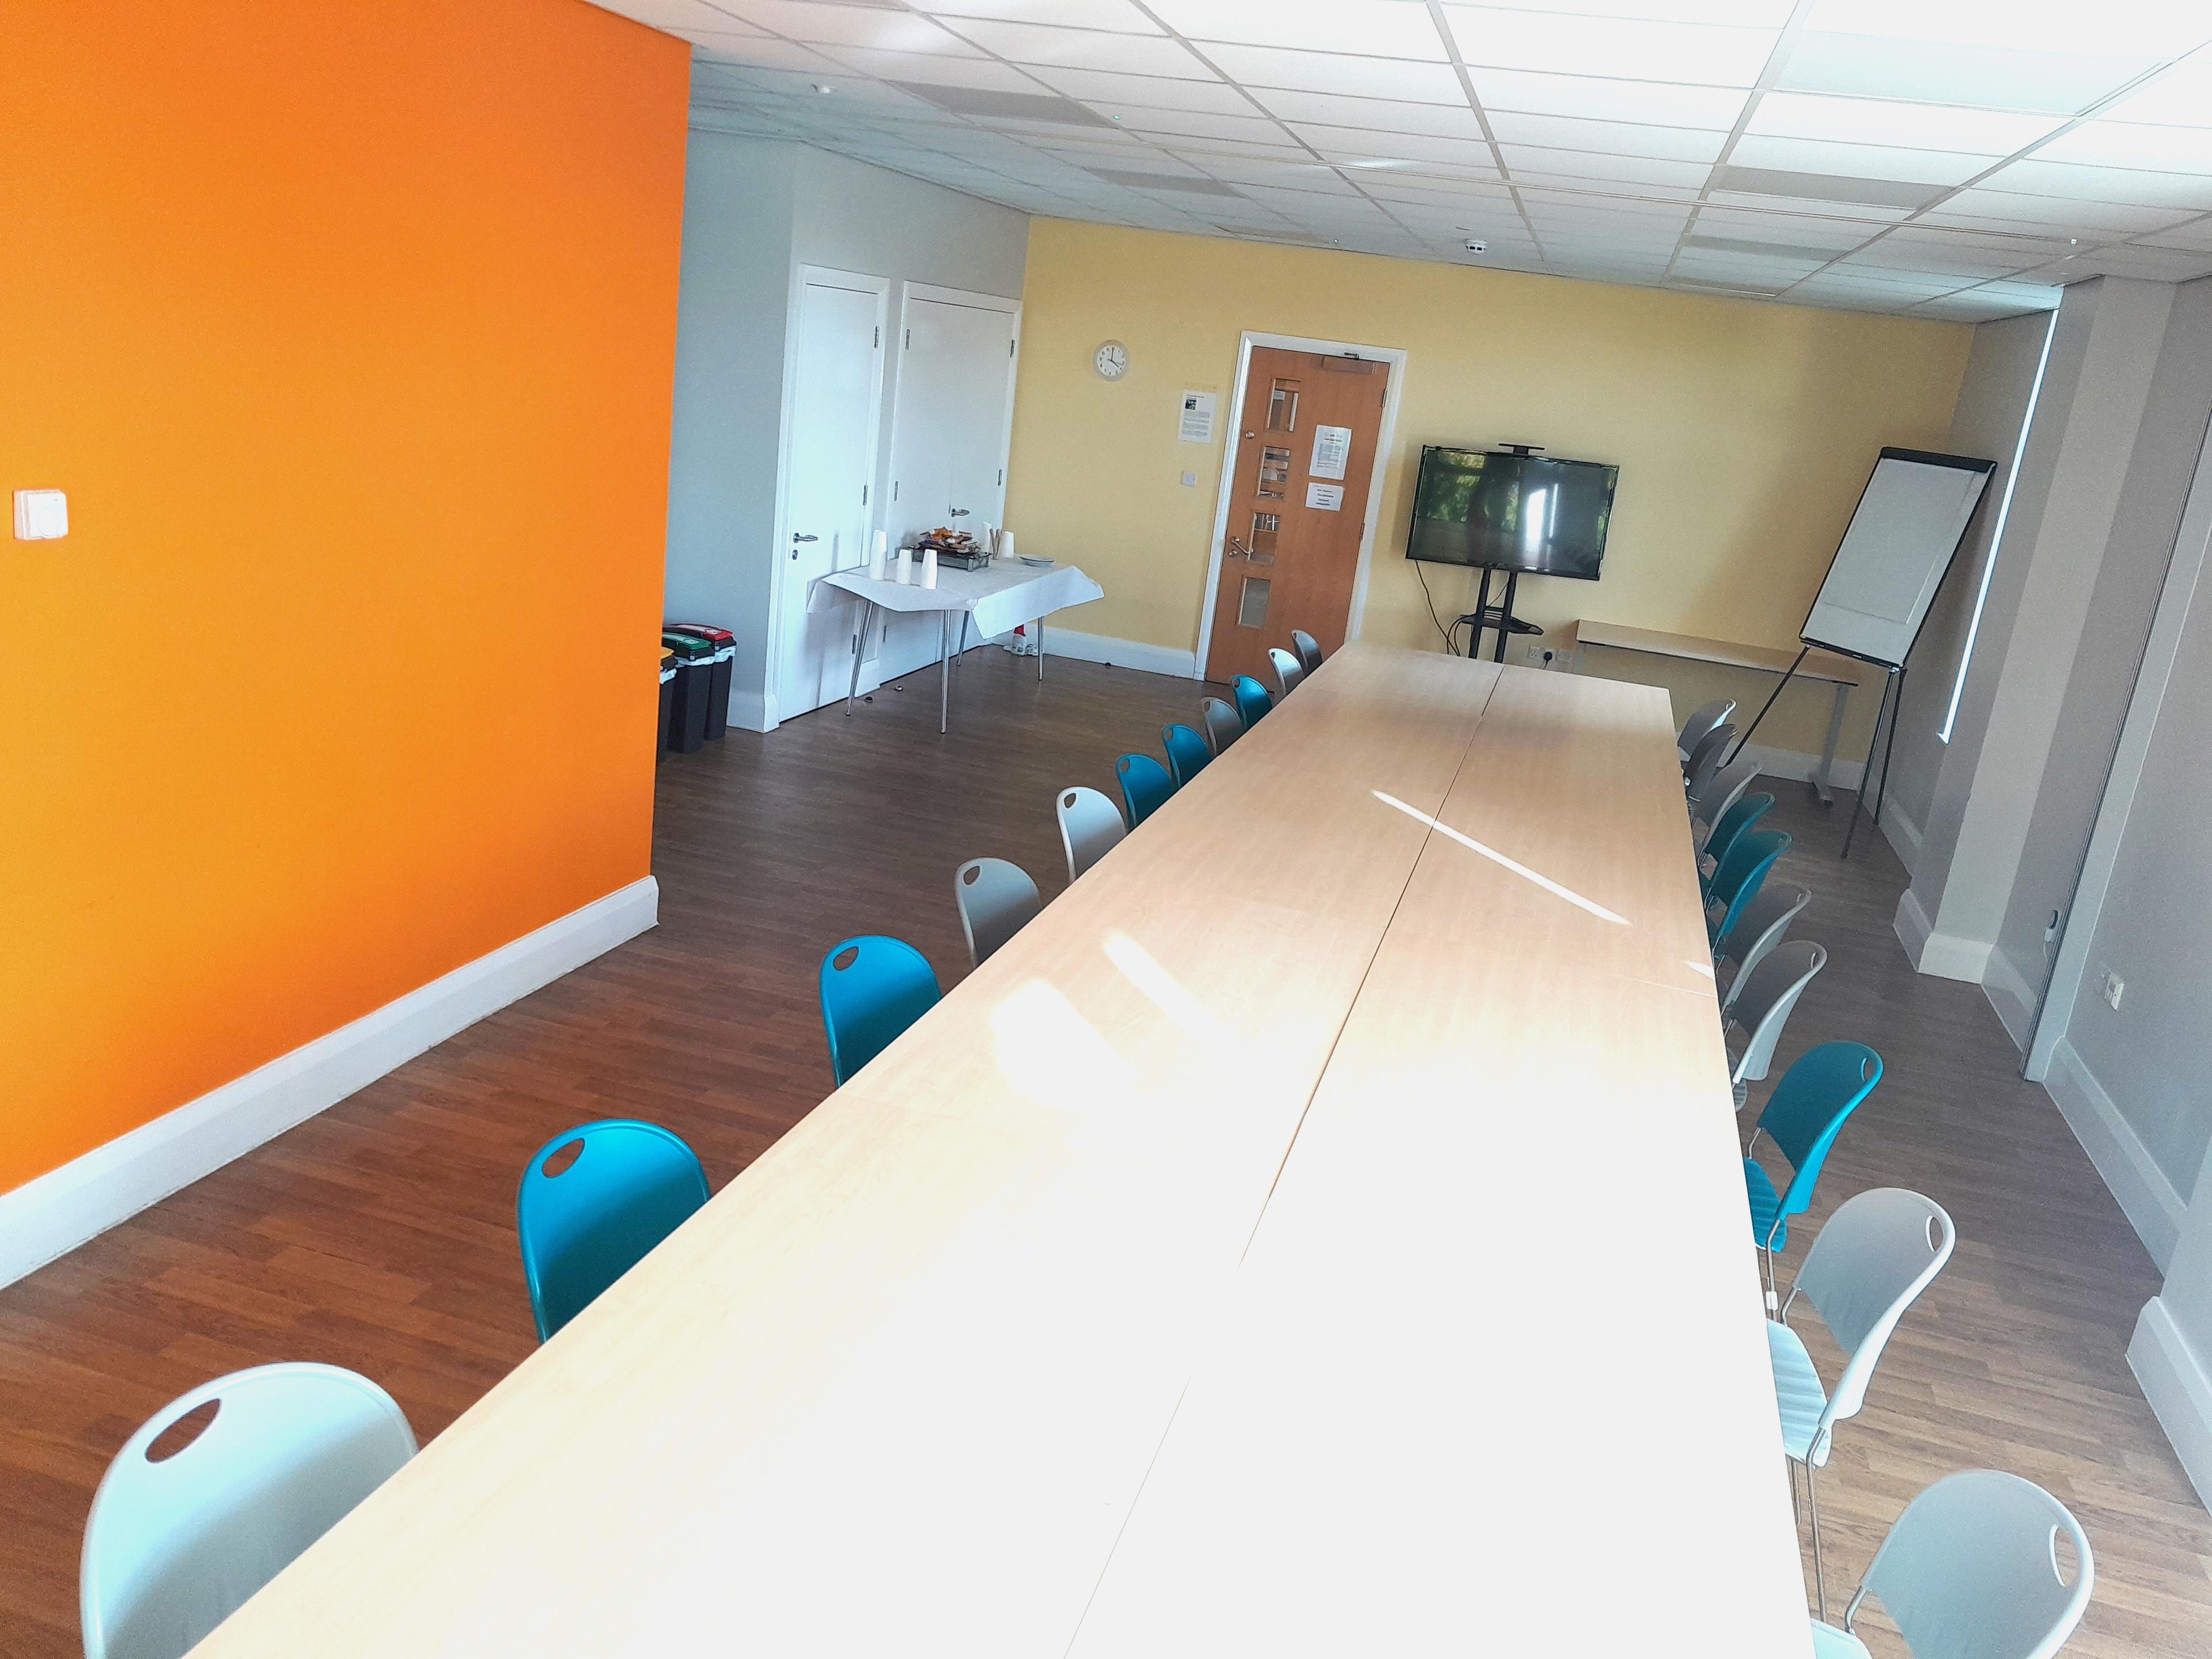 The Lifecentre, Luther King Room photo #1